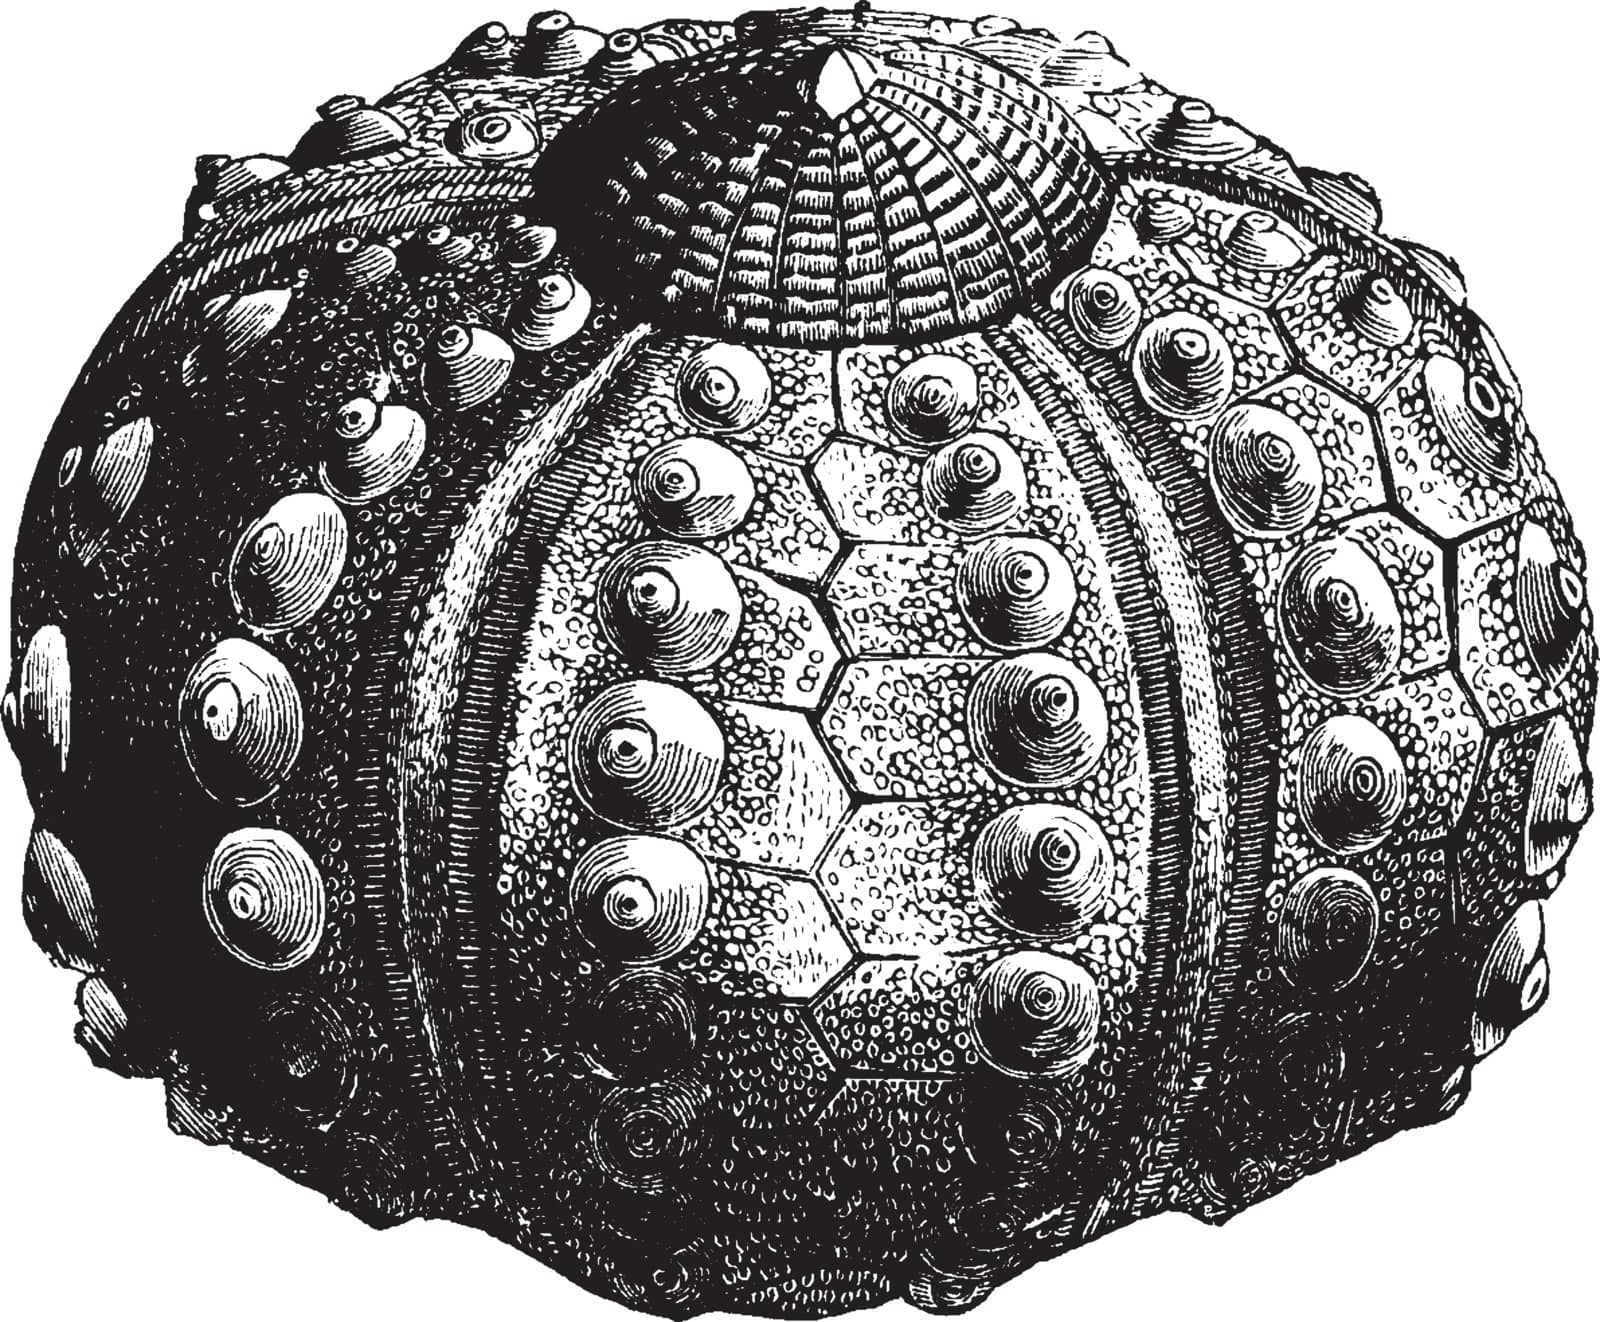 Sea urchin without spines is made up of several hundred polygonal pieces of different sizes of every variety of outline, vintage line drawing or engraving illustration.